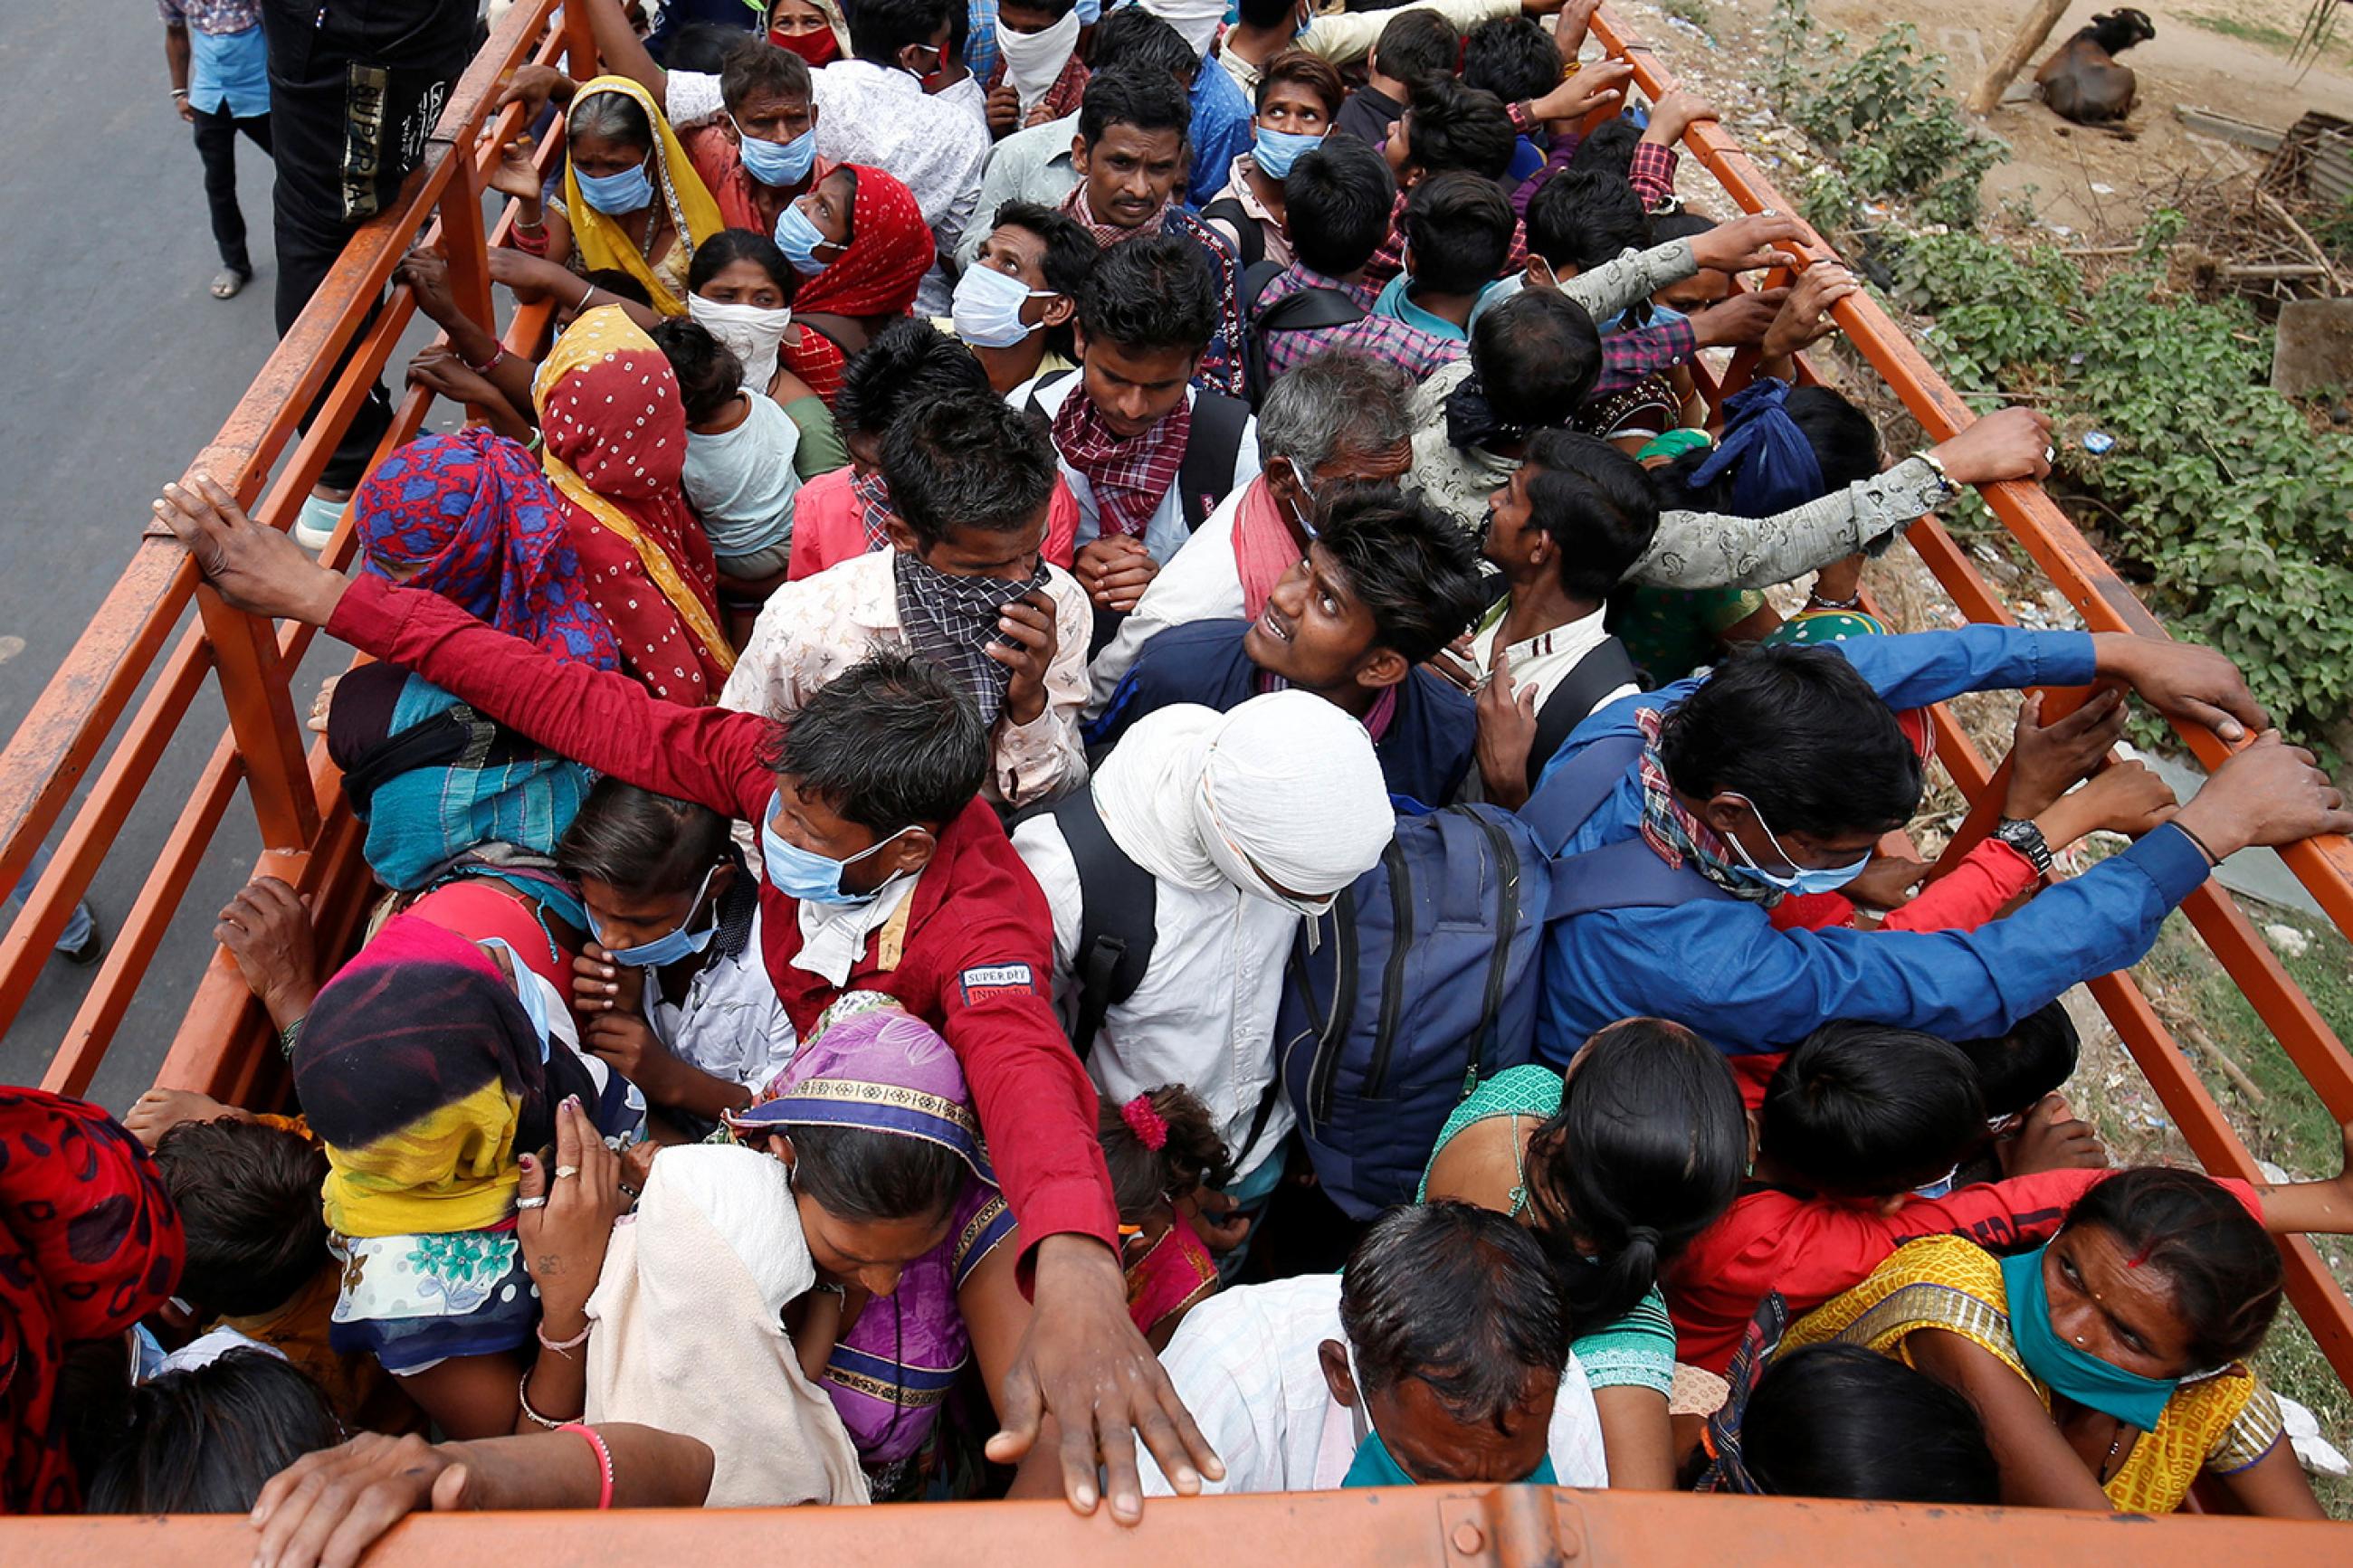 India migrant workers and their families in Ahmedabad board a truck to return to their villages on March 25, 2020 after India ordered a 21-day nationwide lockdown to limit the spread of coronavirus. The photo shows the back of a flatbed truck from above. People are packed in the vehicle beyond capacity, sardined together for what looks like a bumpy ride. REUTERS/Amit Dave